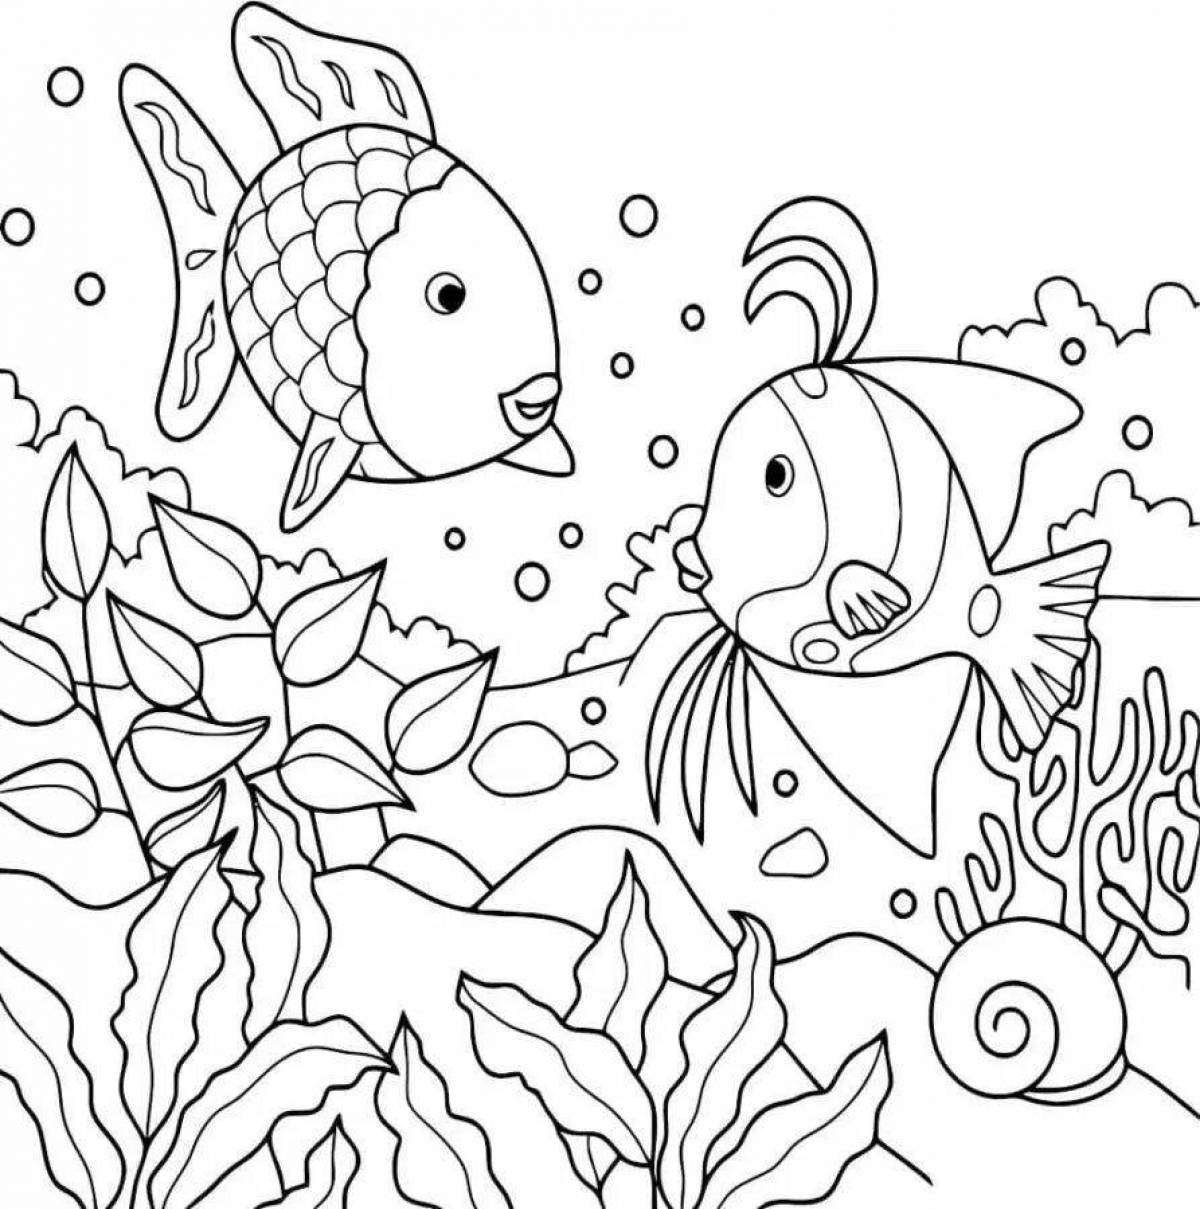 Glorious sea fish coloring page